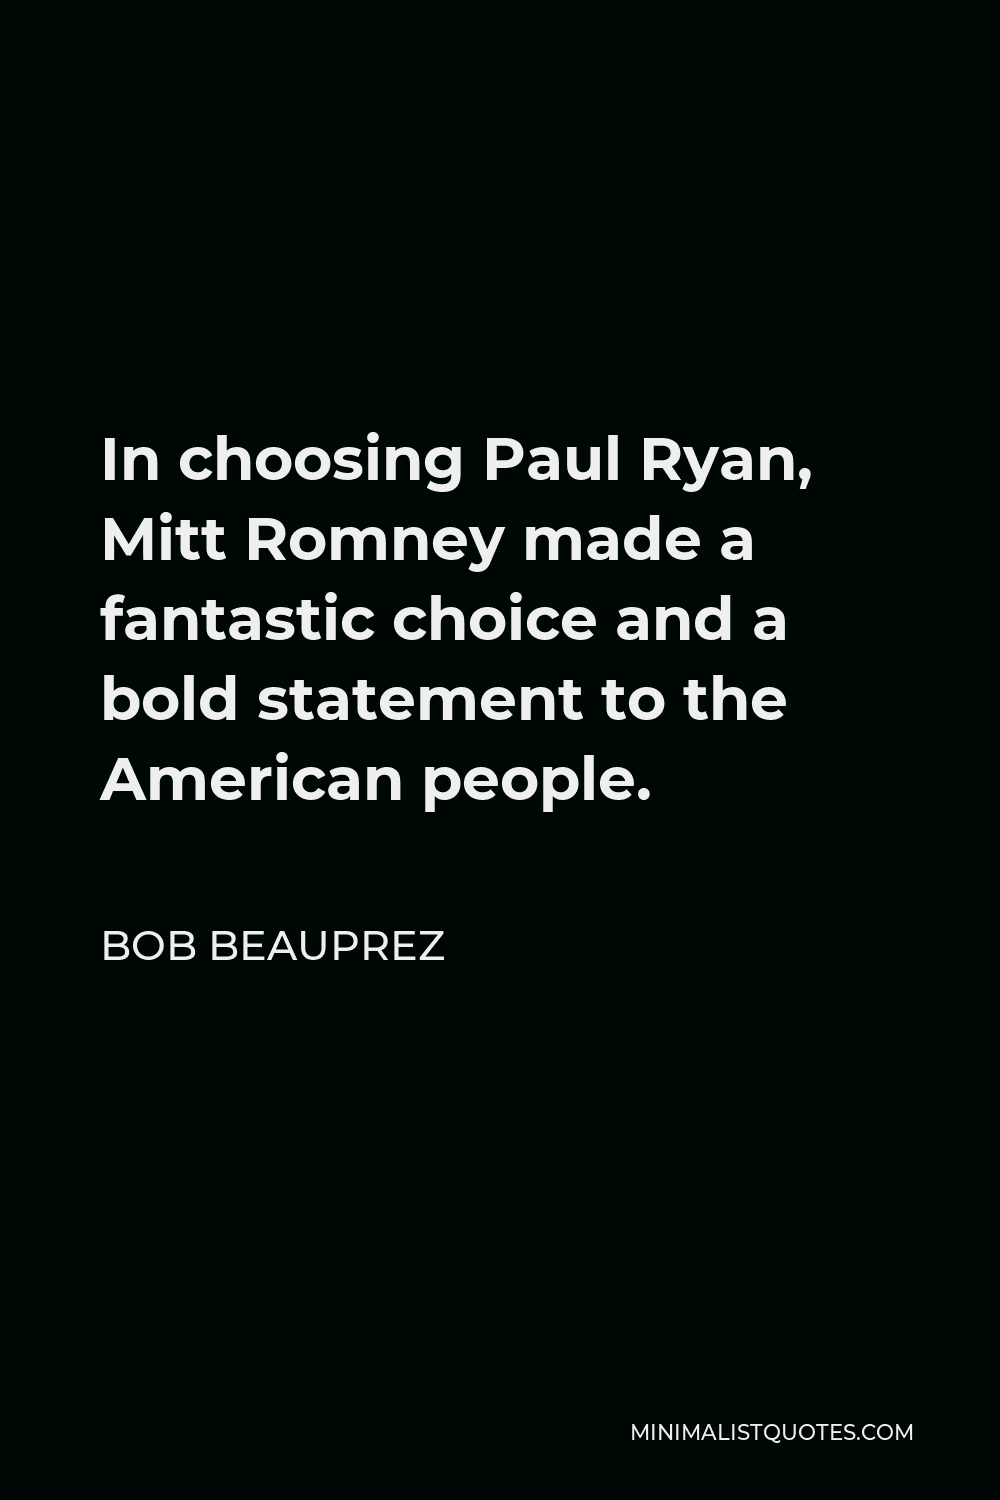 Bob Beauprez Quote - In choosing Paul Ryan, Mitt Romney made a fantastic choice and a bold statement to the American people.